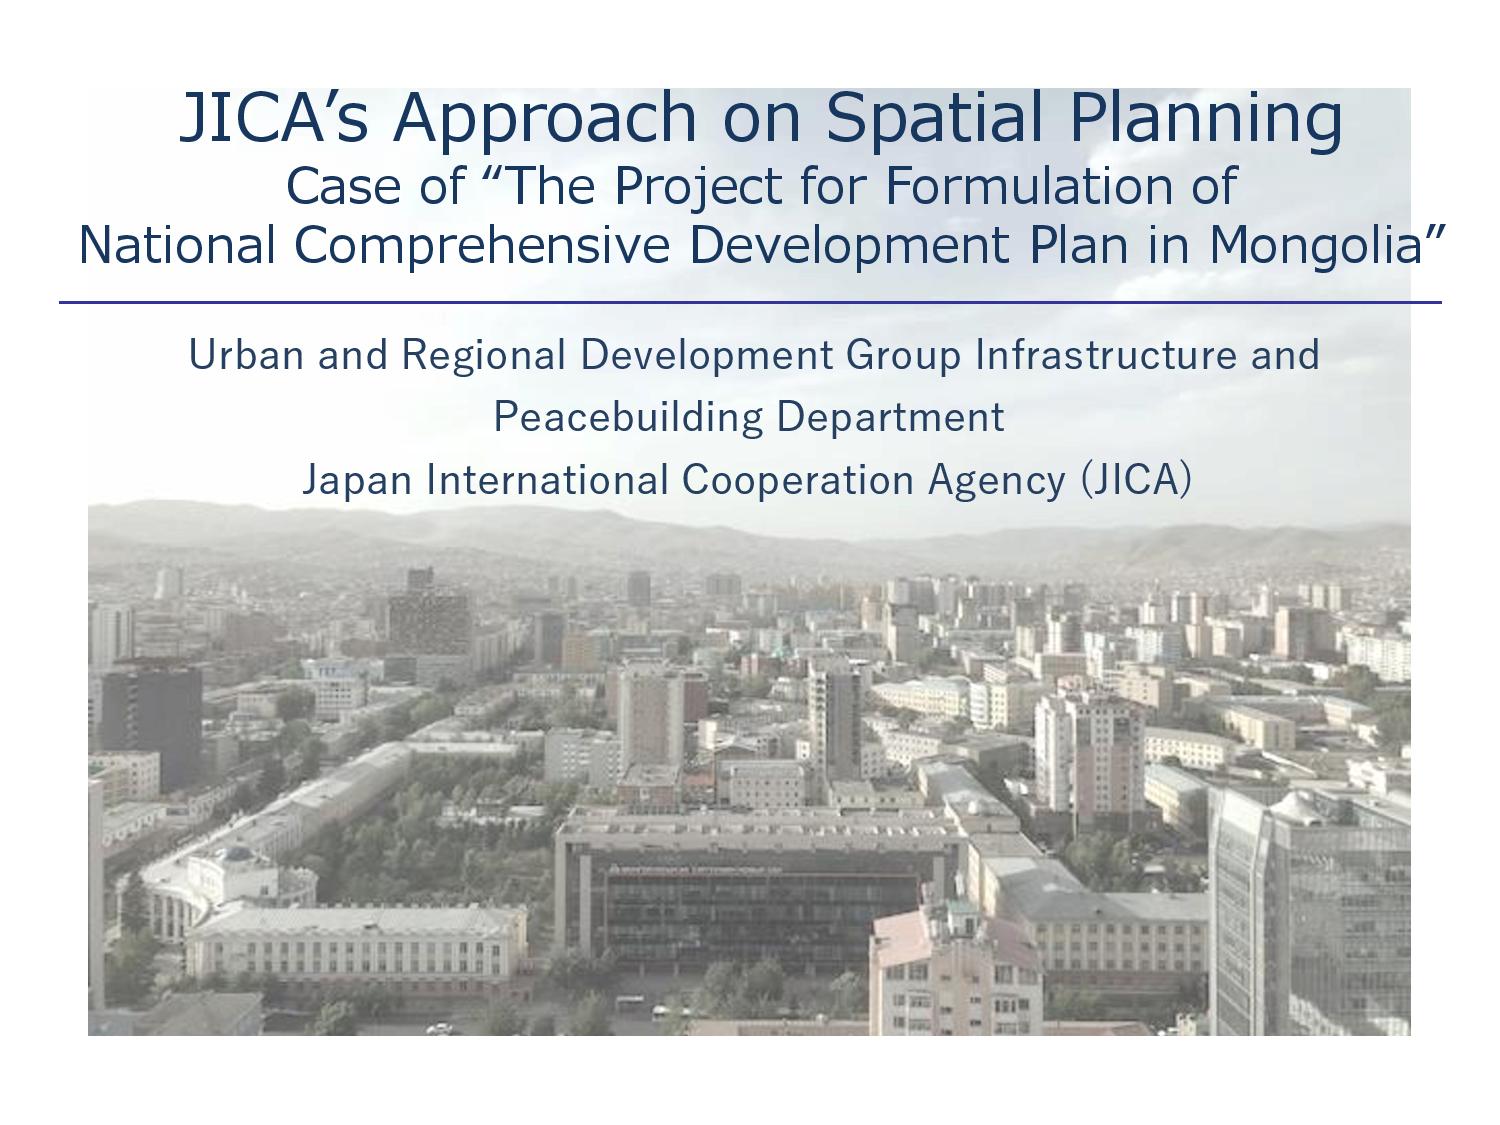 2nd Spatial Planning Platform (SPP) Meeting: Part II – JICA’s Approach on Spatial Planning (Mongolia)